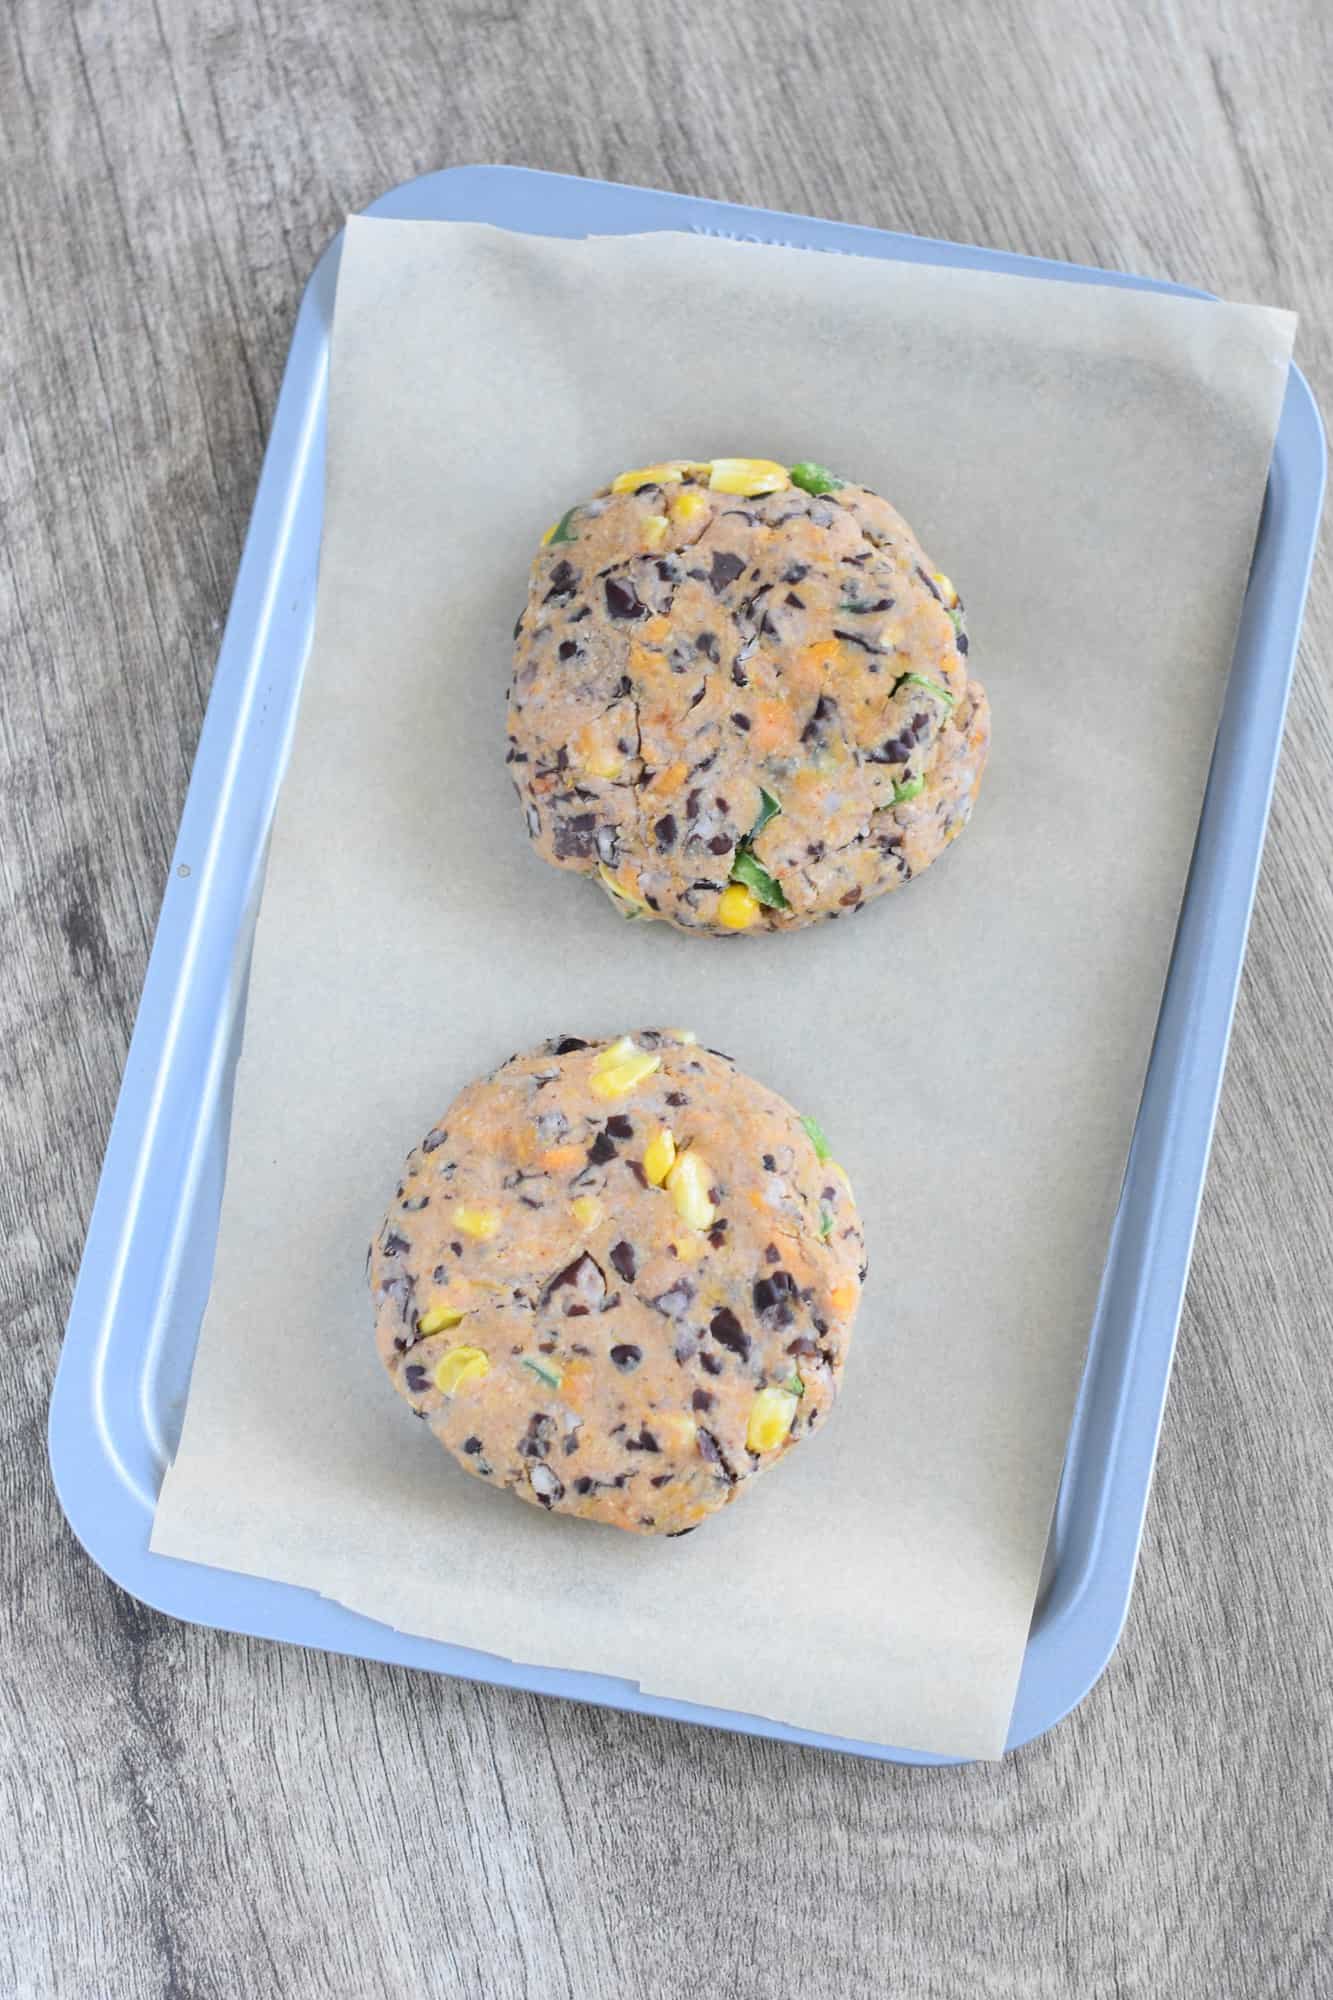 formed sweet potato black bean burgers on a parchment-lined baking sheet after freezing for one hour